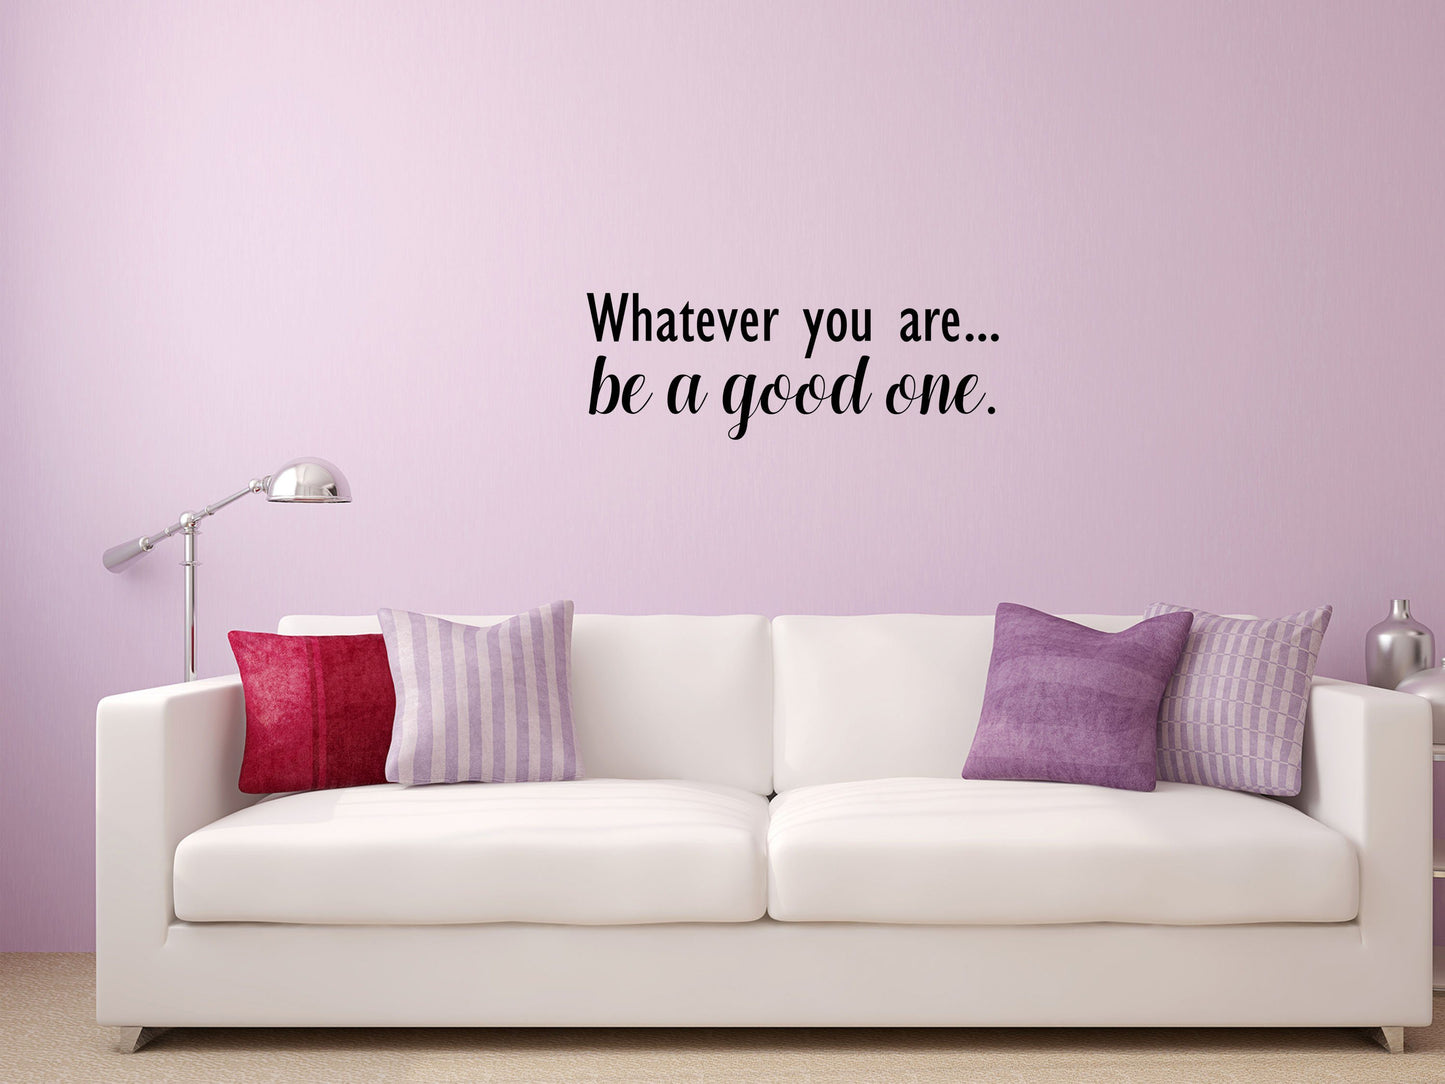 Whatever you are.. Be a Good One - Inspirational Wall Decals Home Decor Decals Inspirational Wall Signs 